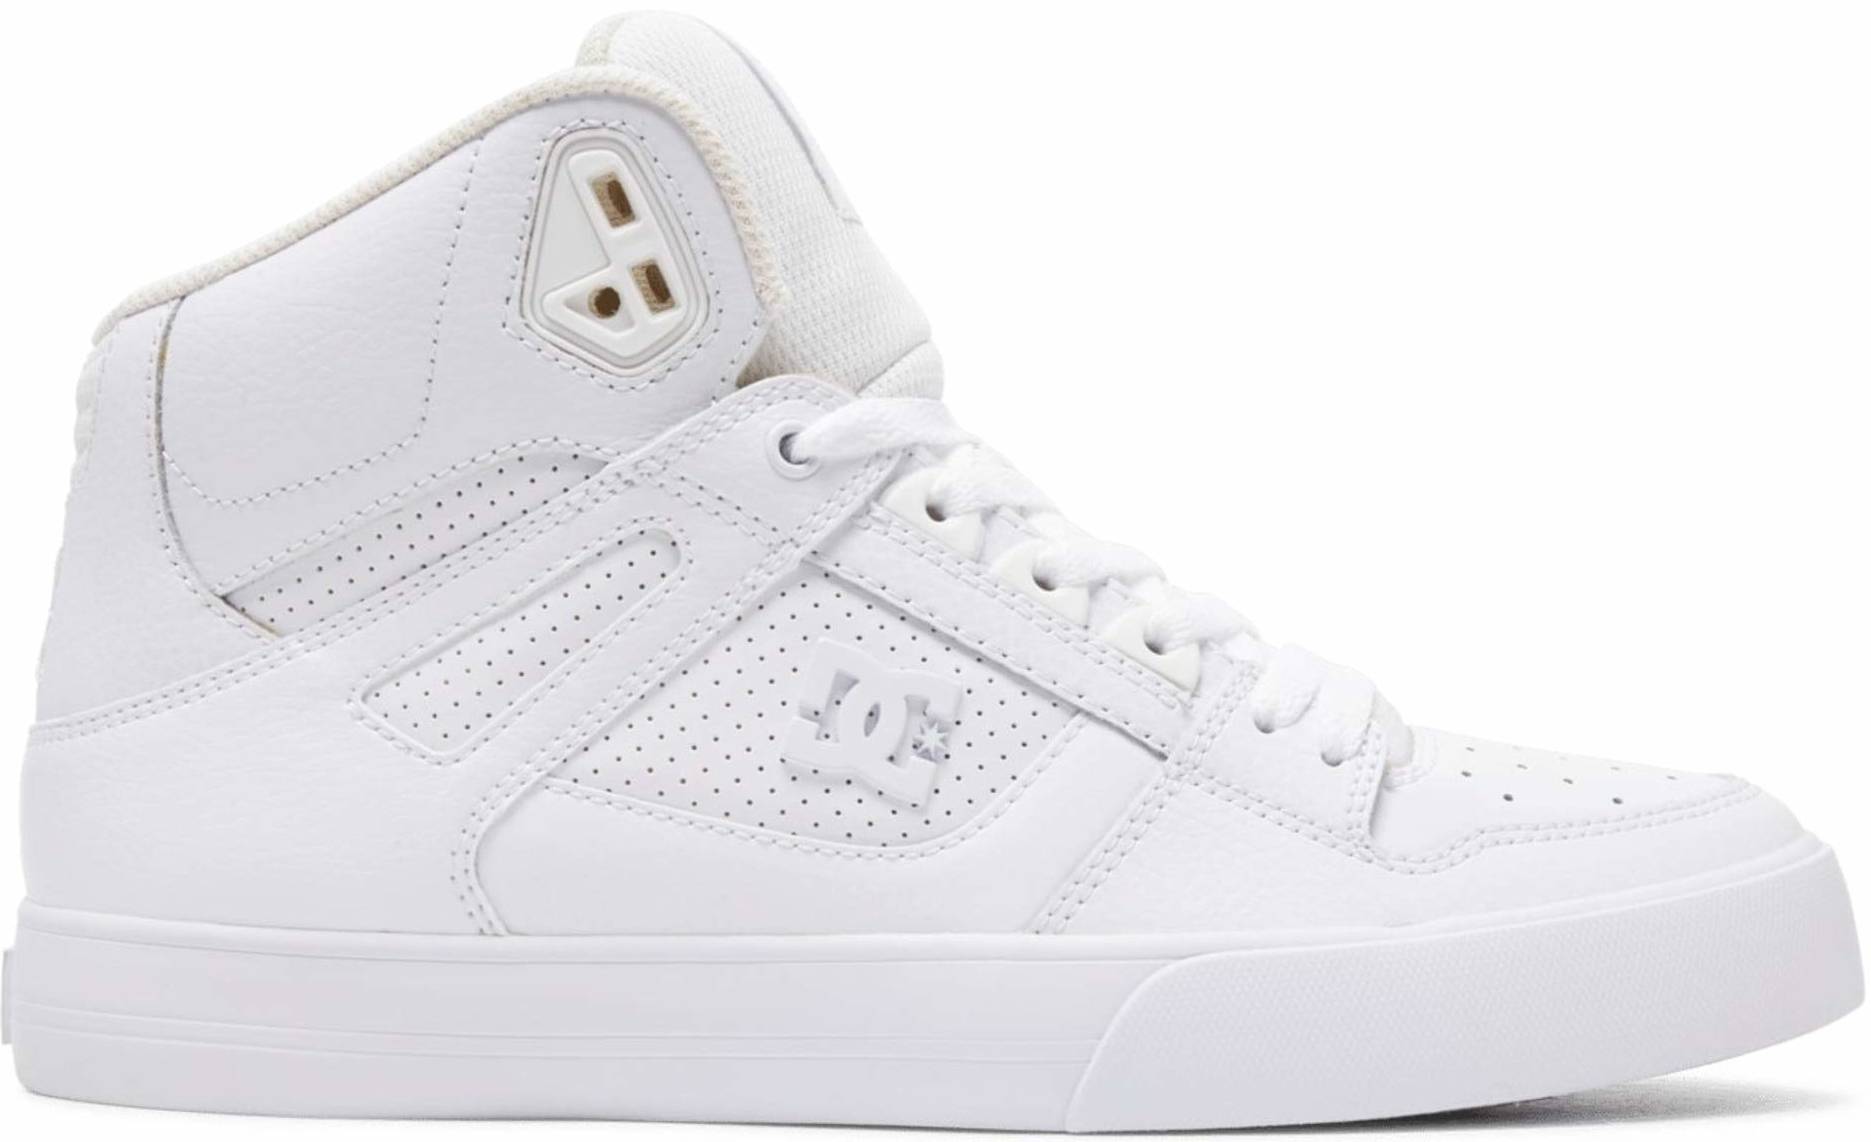 Save 32% on White High Top Sneakers (51 